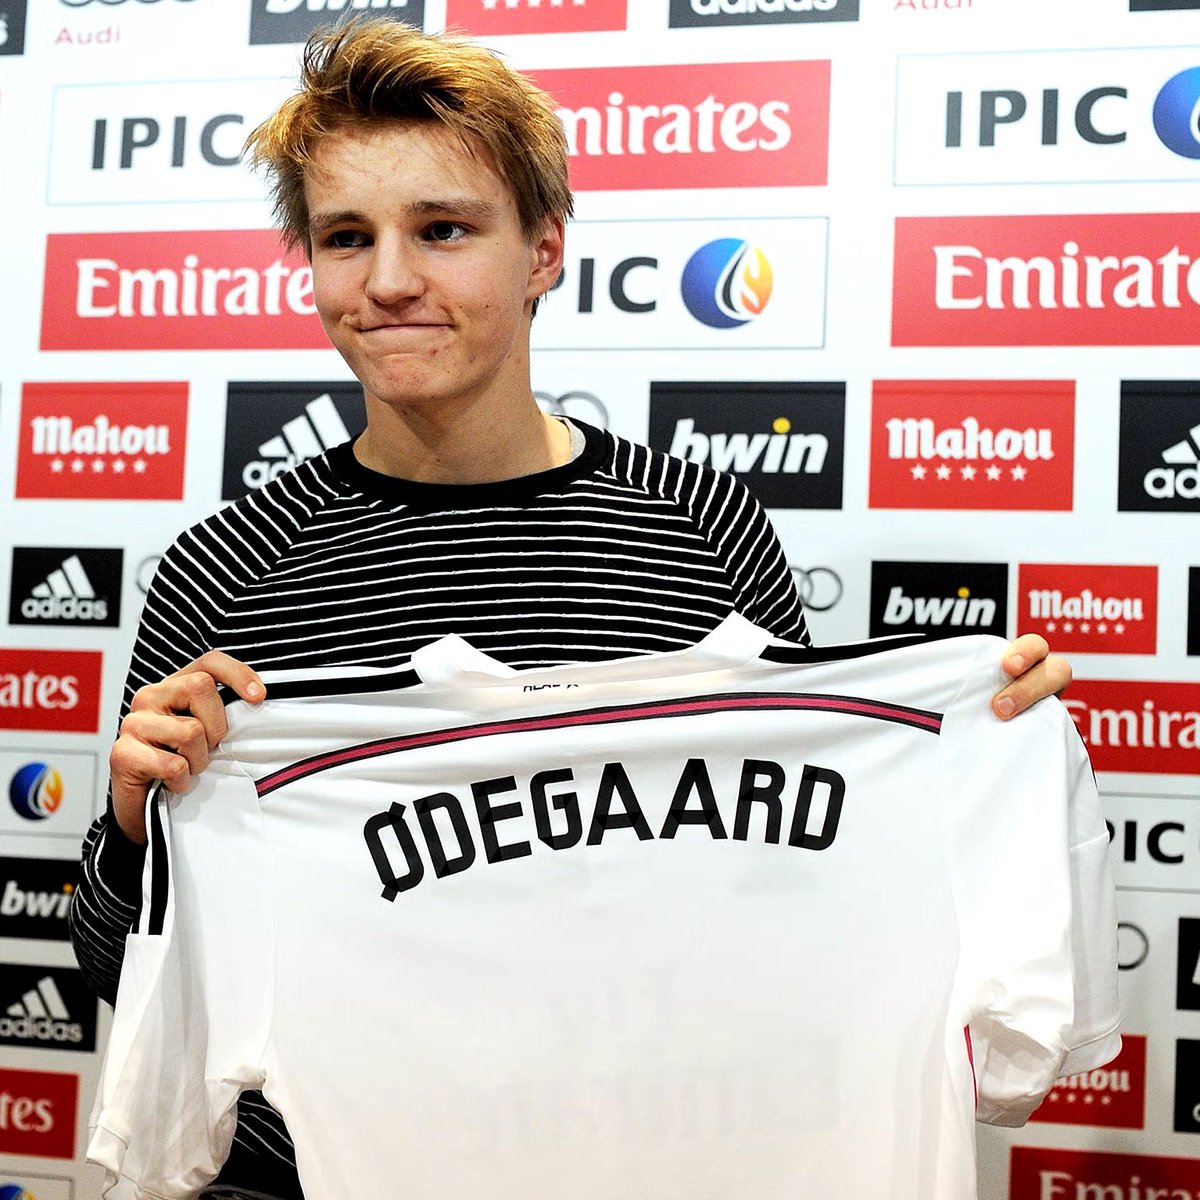 Mikel Arteta on Martin Ødegaard succeeding despite the wonderkid tag: 'He had to wear that kit since he was 14, 15. I think he handled that in a good way, especially when he went to Real Sociedad, I think it was a really intelligent move. Now we have the player that we have.'